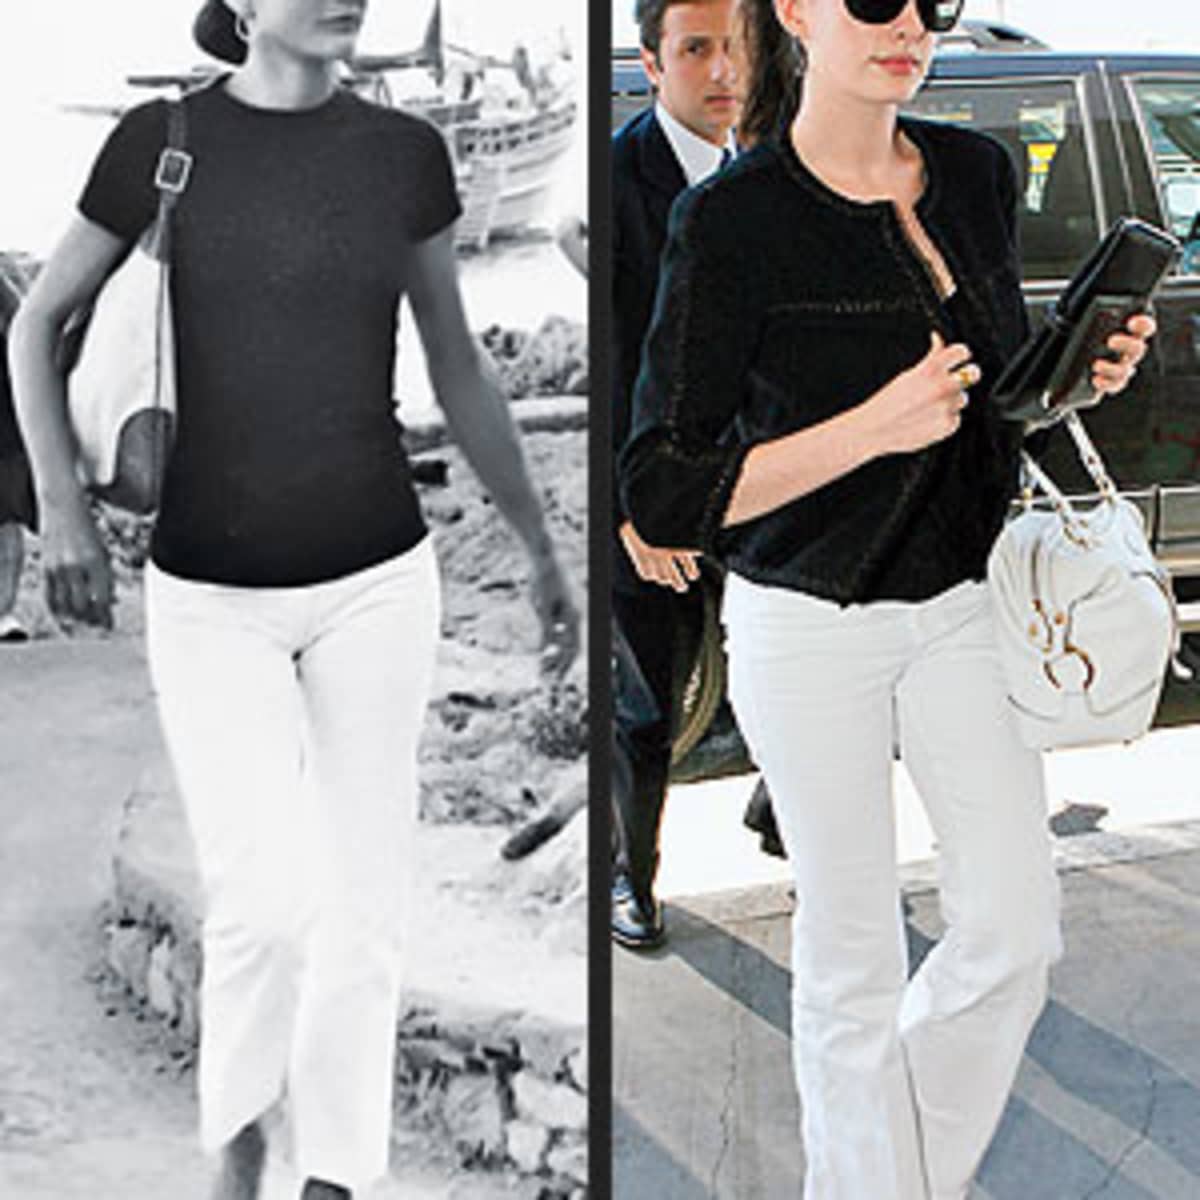 JBK - Jackie Kennedy and Her Fashion Style Impact Upon the United